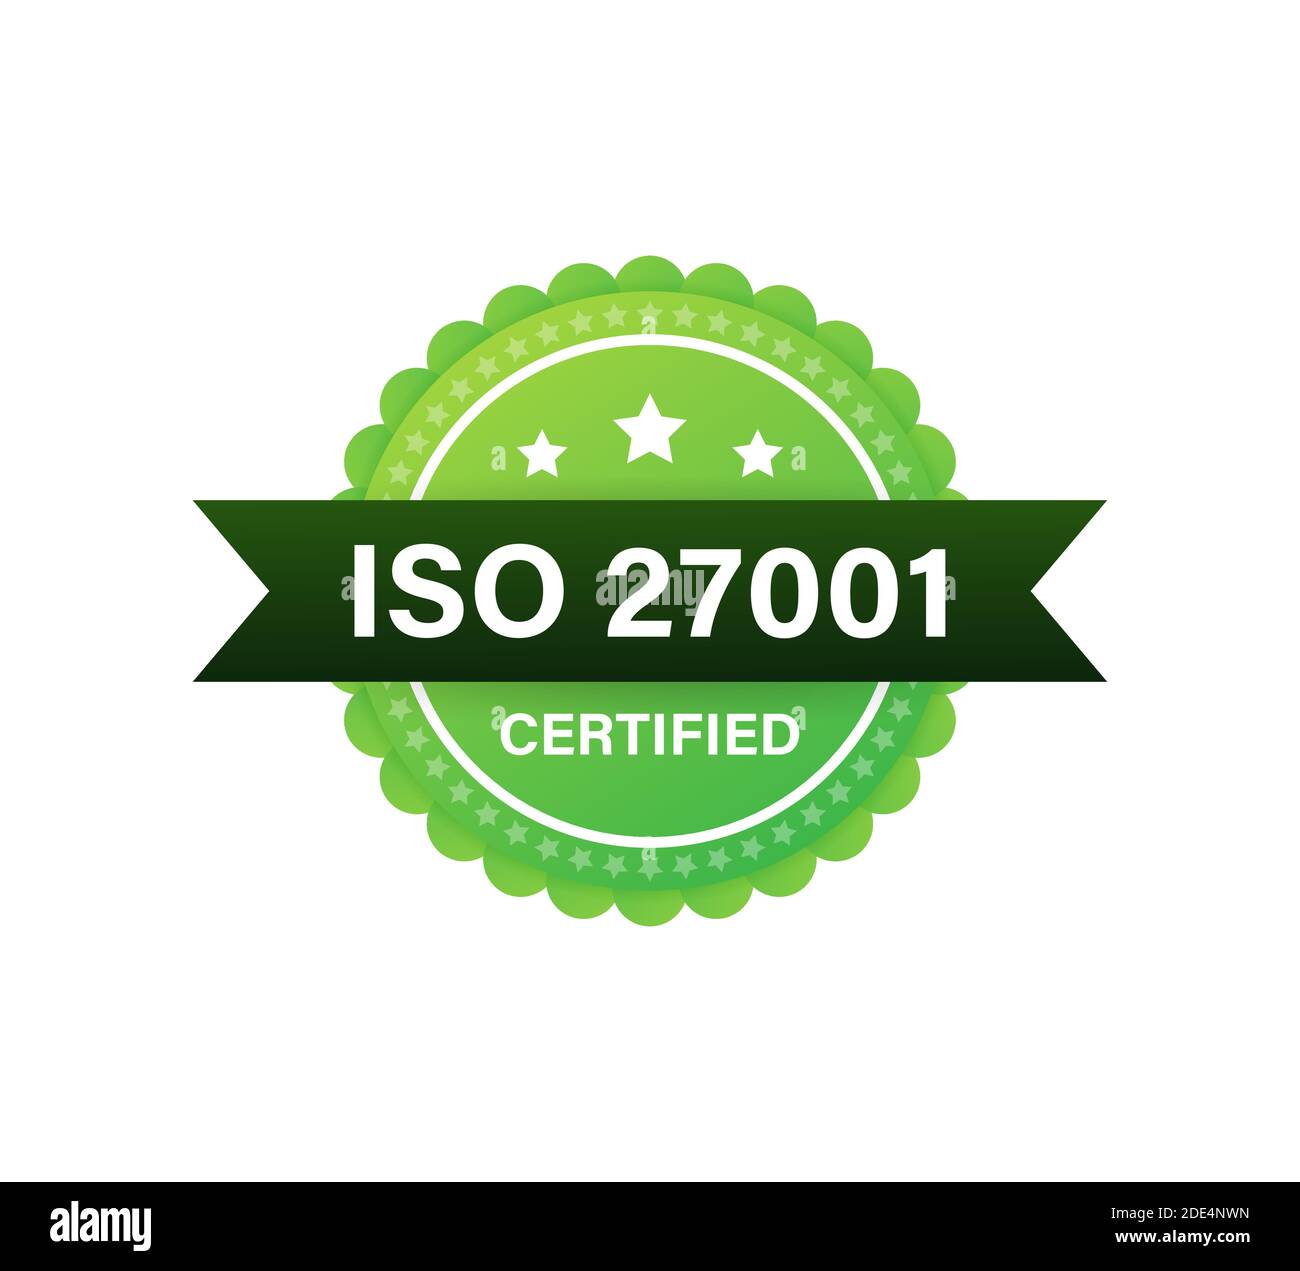 ISO 27001 Certified badge, icon. Certification stamp. Flat design. Vector illustration. Stock Vector